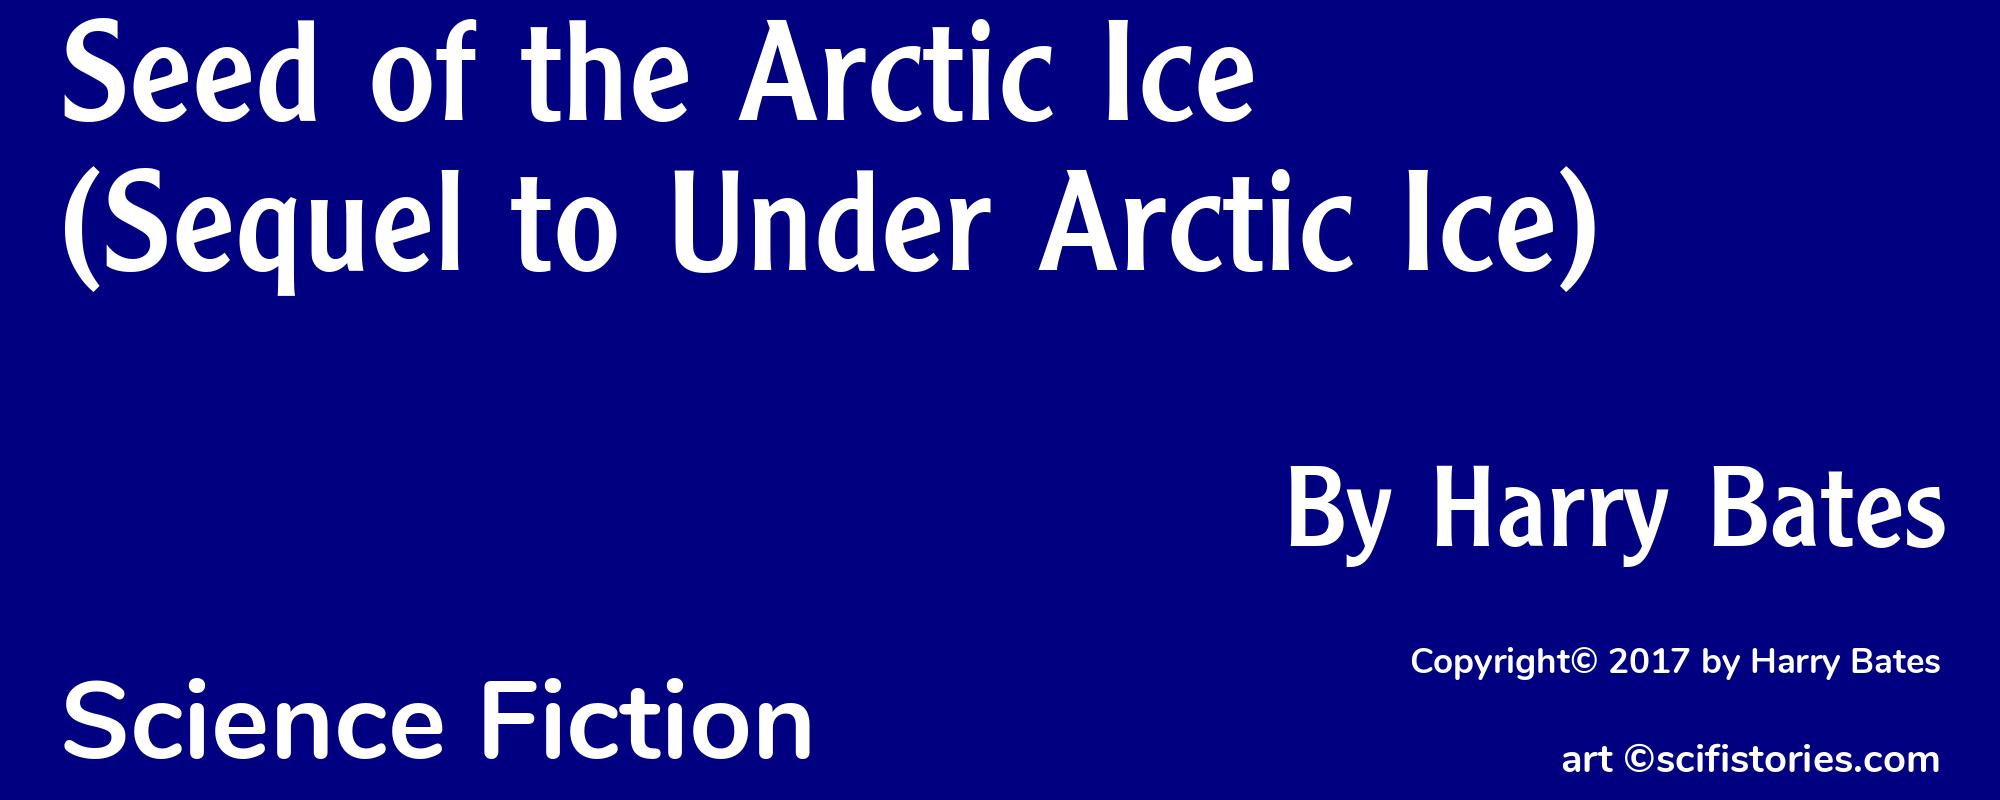 Seed of the Arctic Ice (Sequel to Under Arctic Ice) - Cover